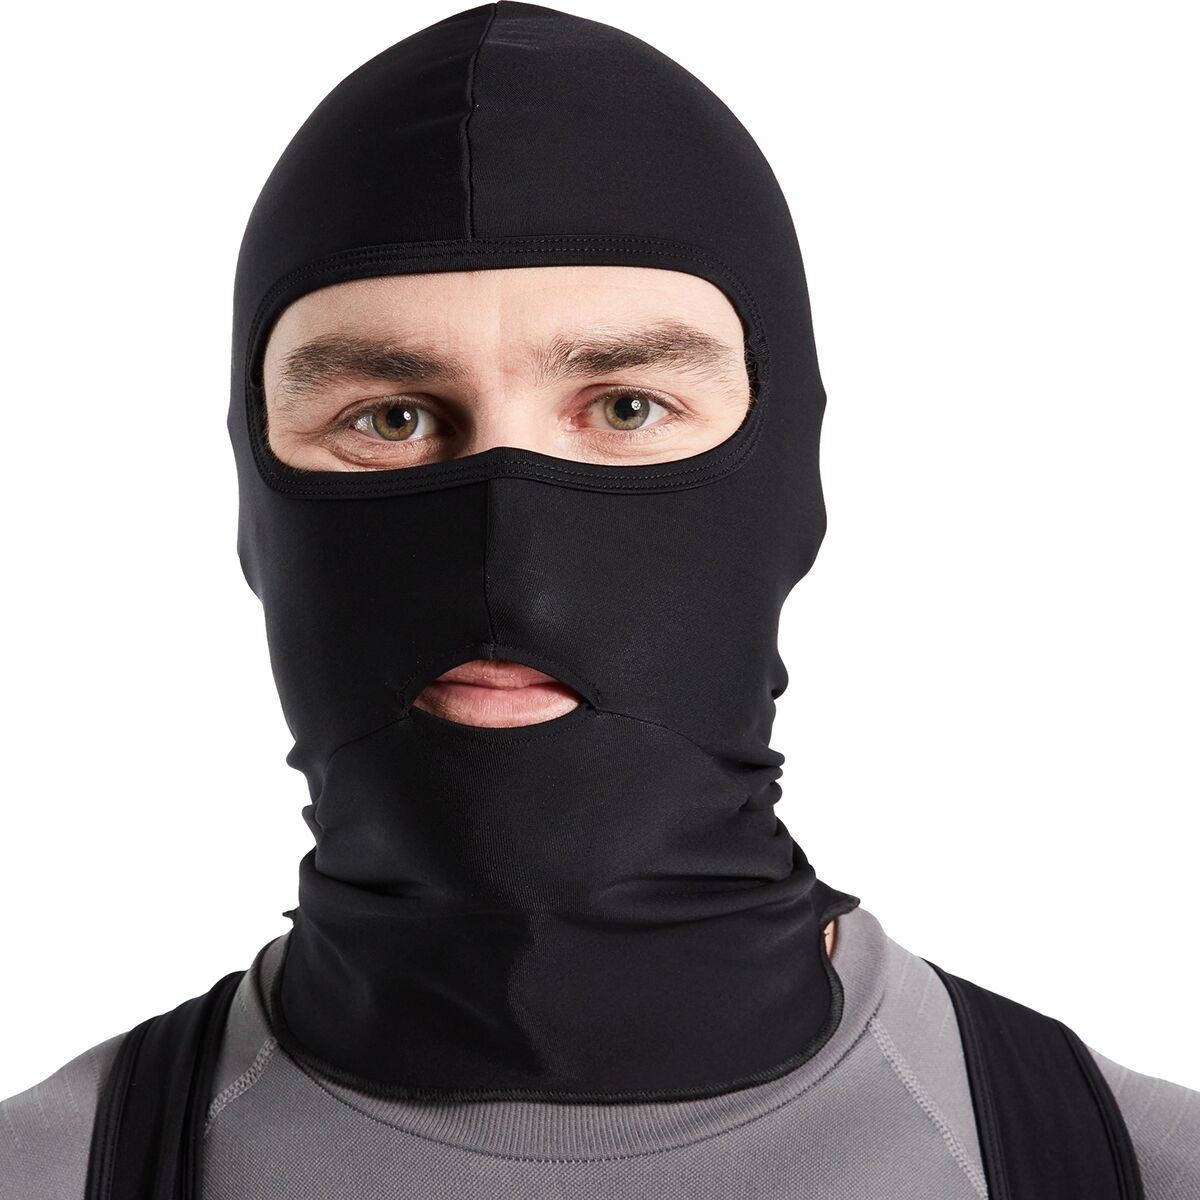 Specialized Thermal Balaclava Black, One Size